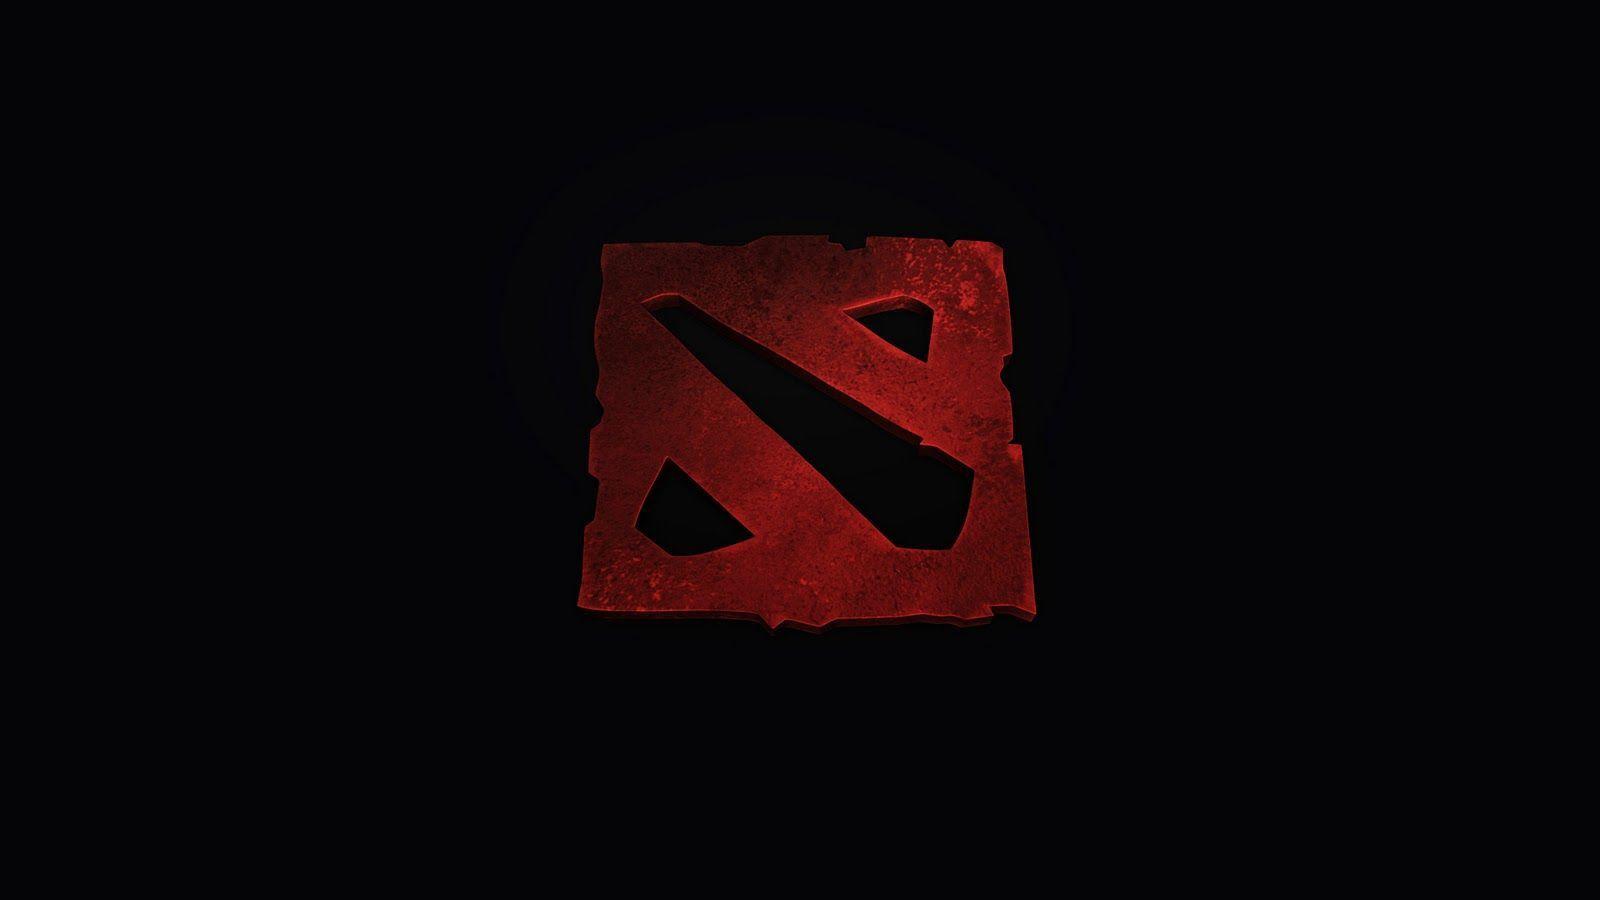 Dota 2 Logos HD Wallpaper in PC Games Free Download Is A Awesome